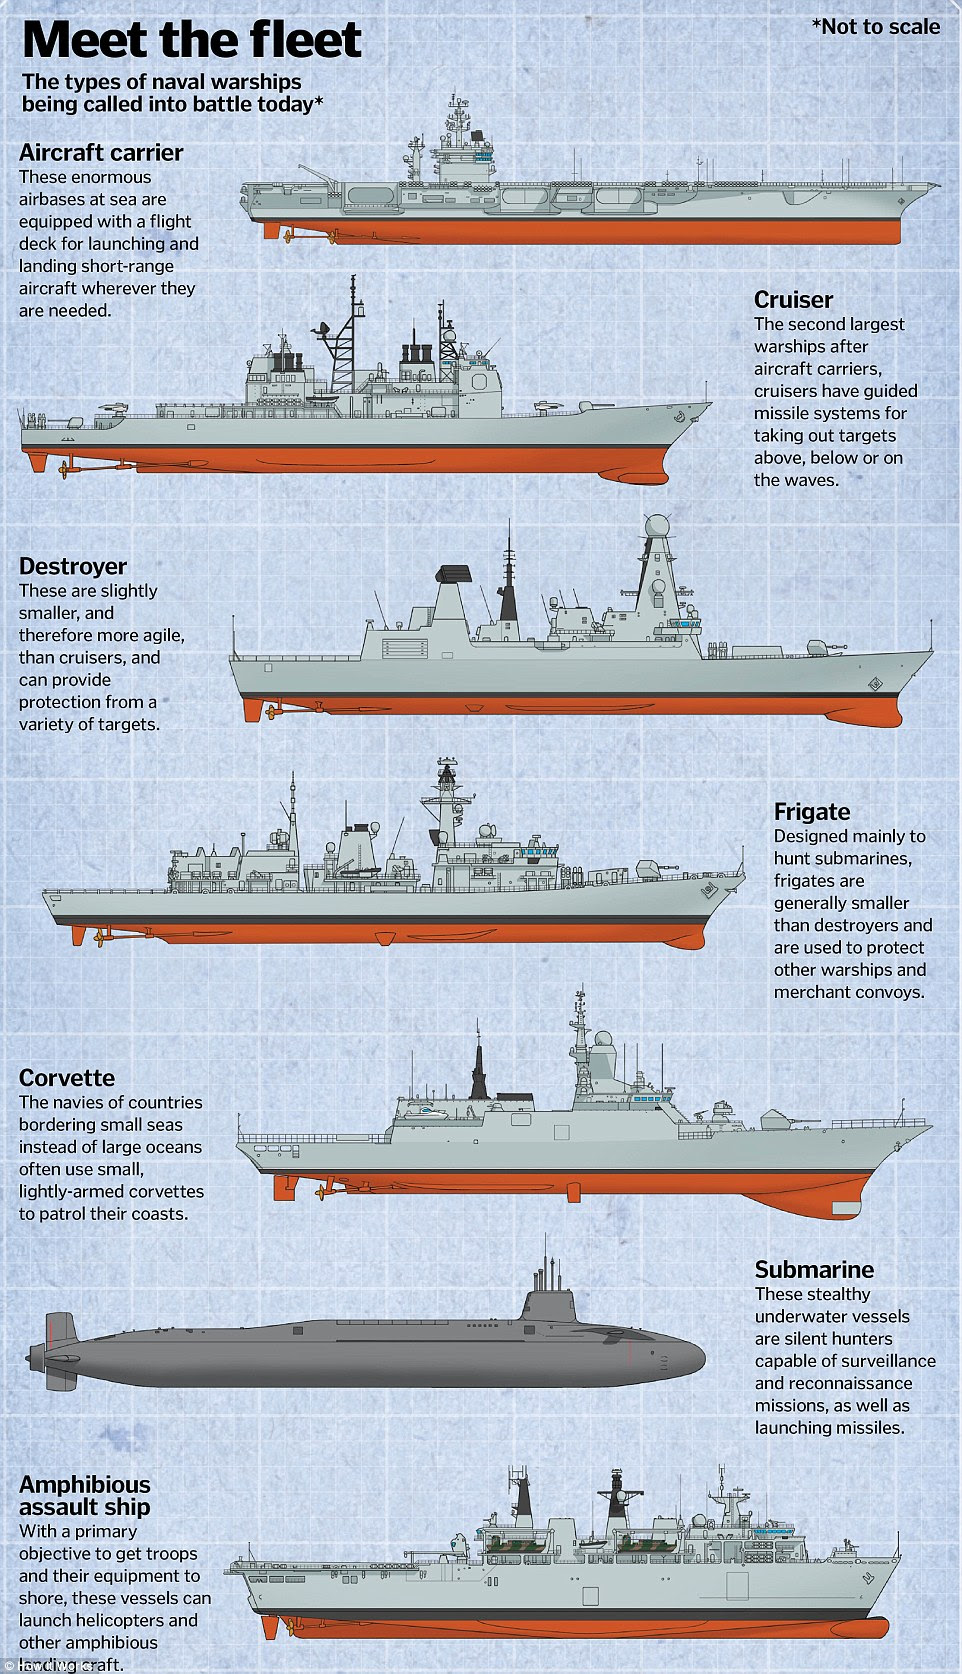 This graphic details the different types of ships in a typical navy fleet, from the aircraft carrier at the top to the amphibious assault ship at the bottom. All of these warships are getting high-tech upgrades and advanced specifications to bring them into the 21st century